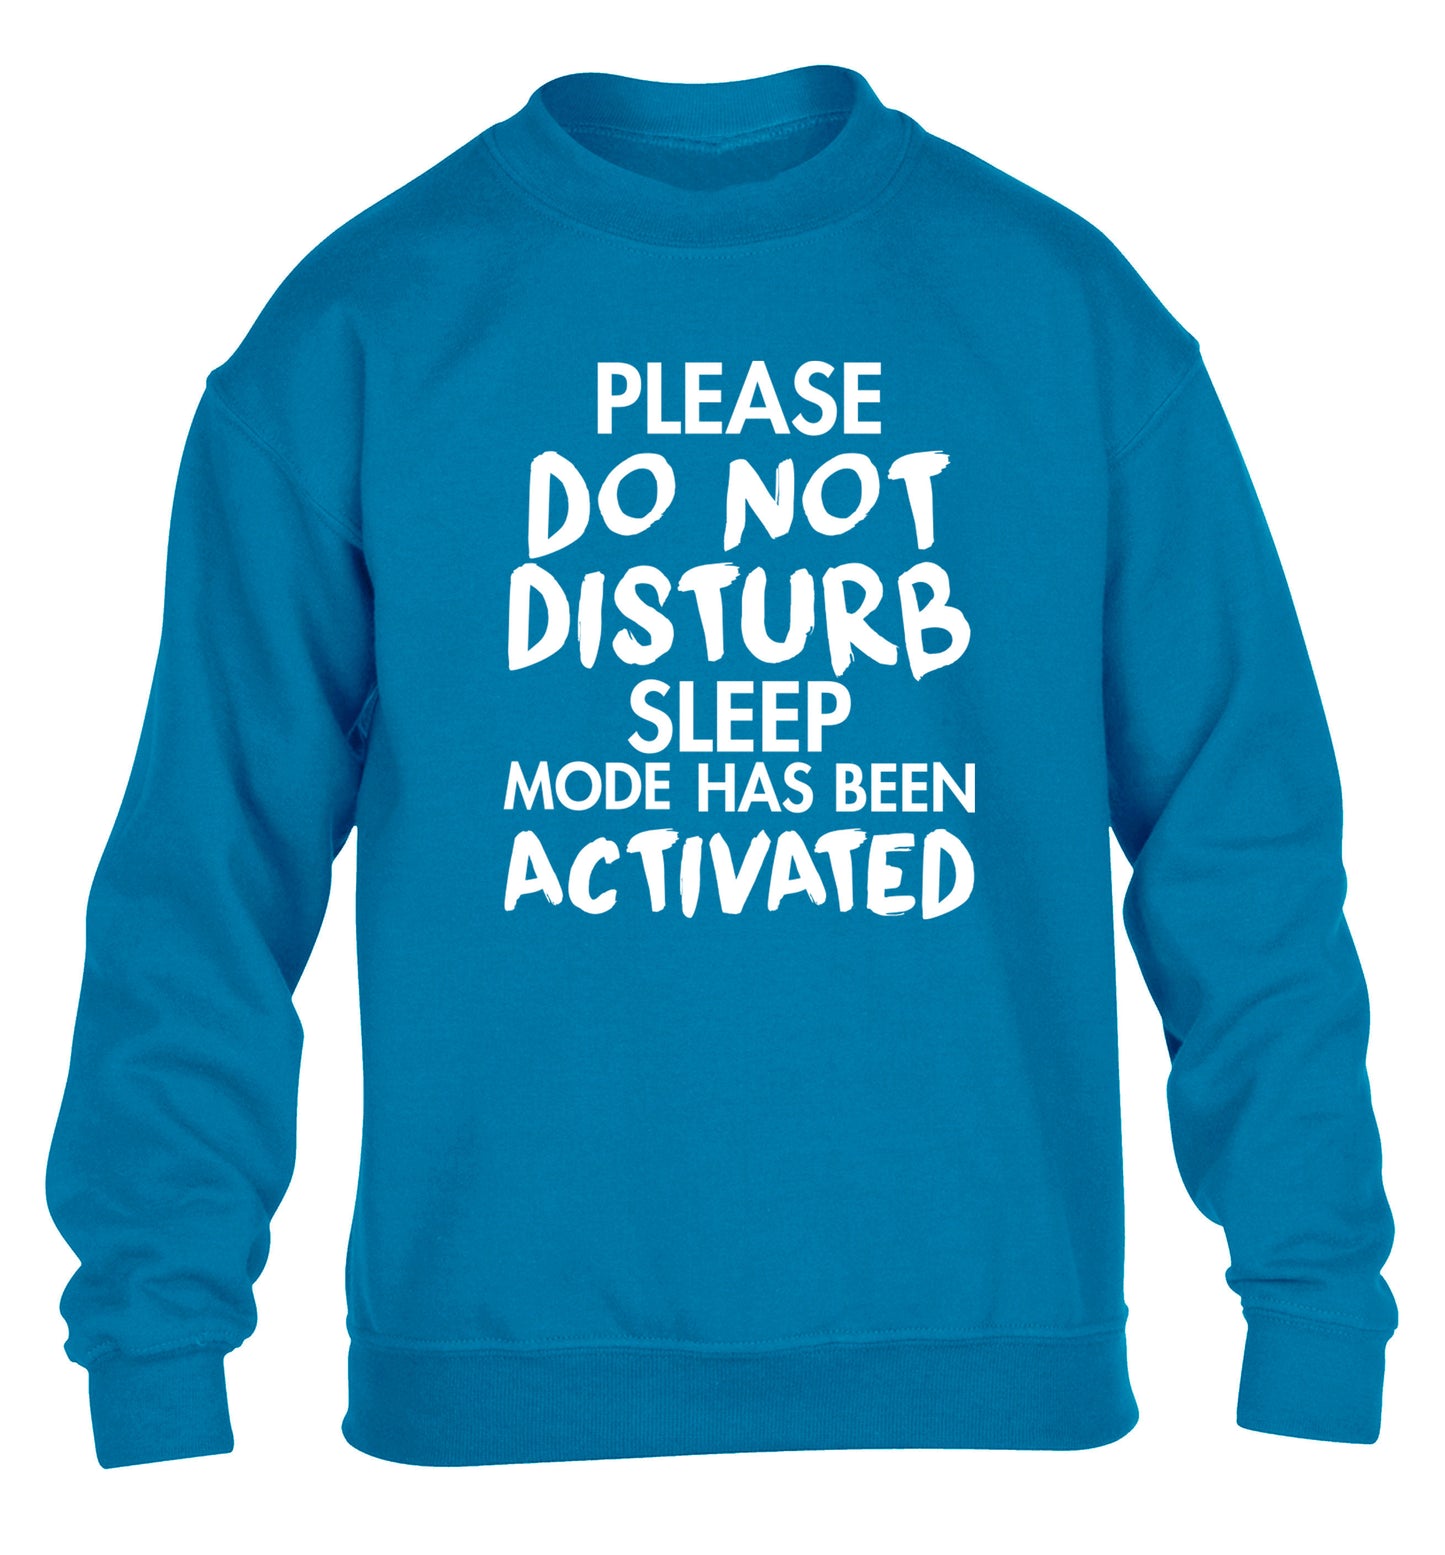 Please do not disturb sleeping mode has been activated children's blue sweater 12-14 Years